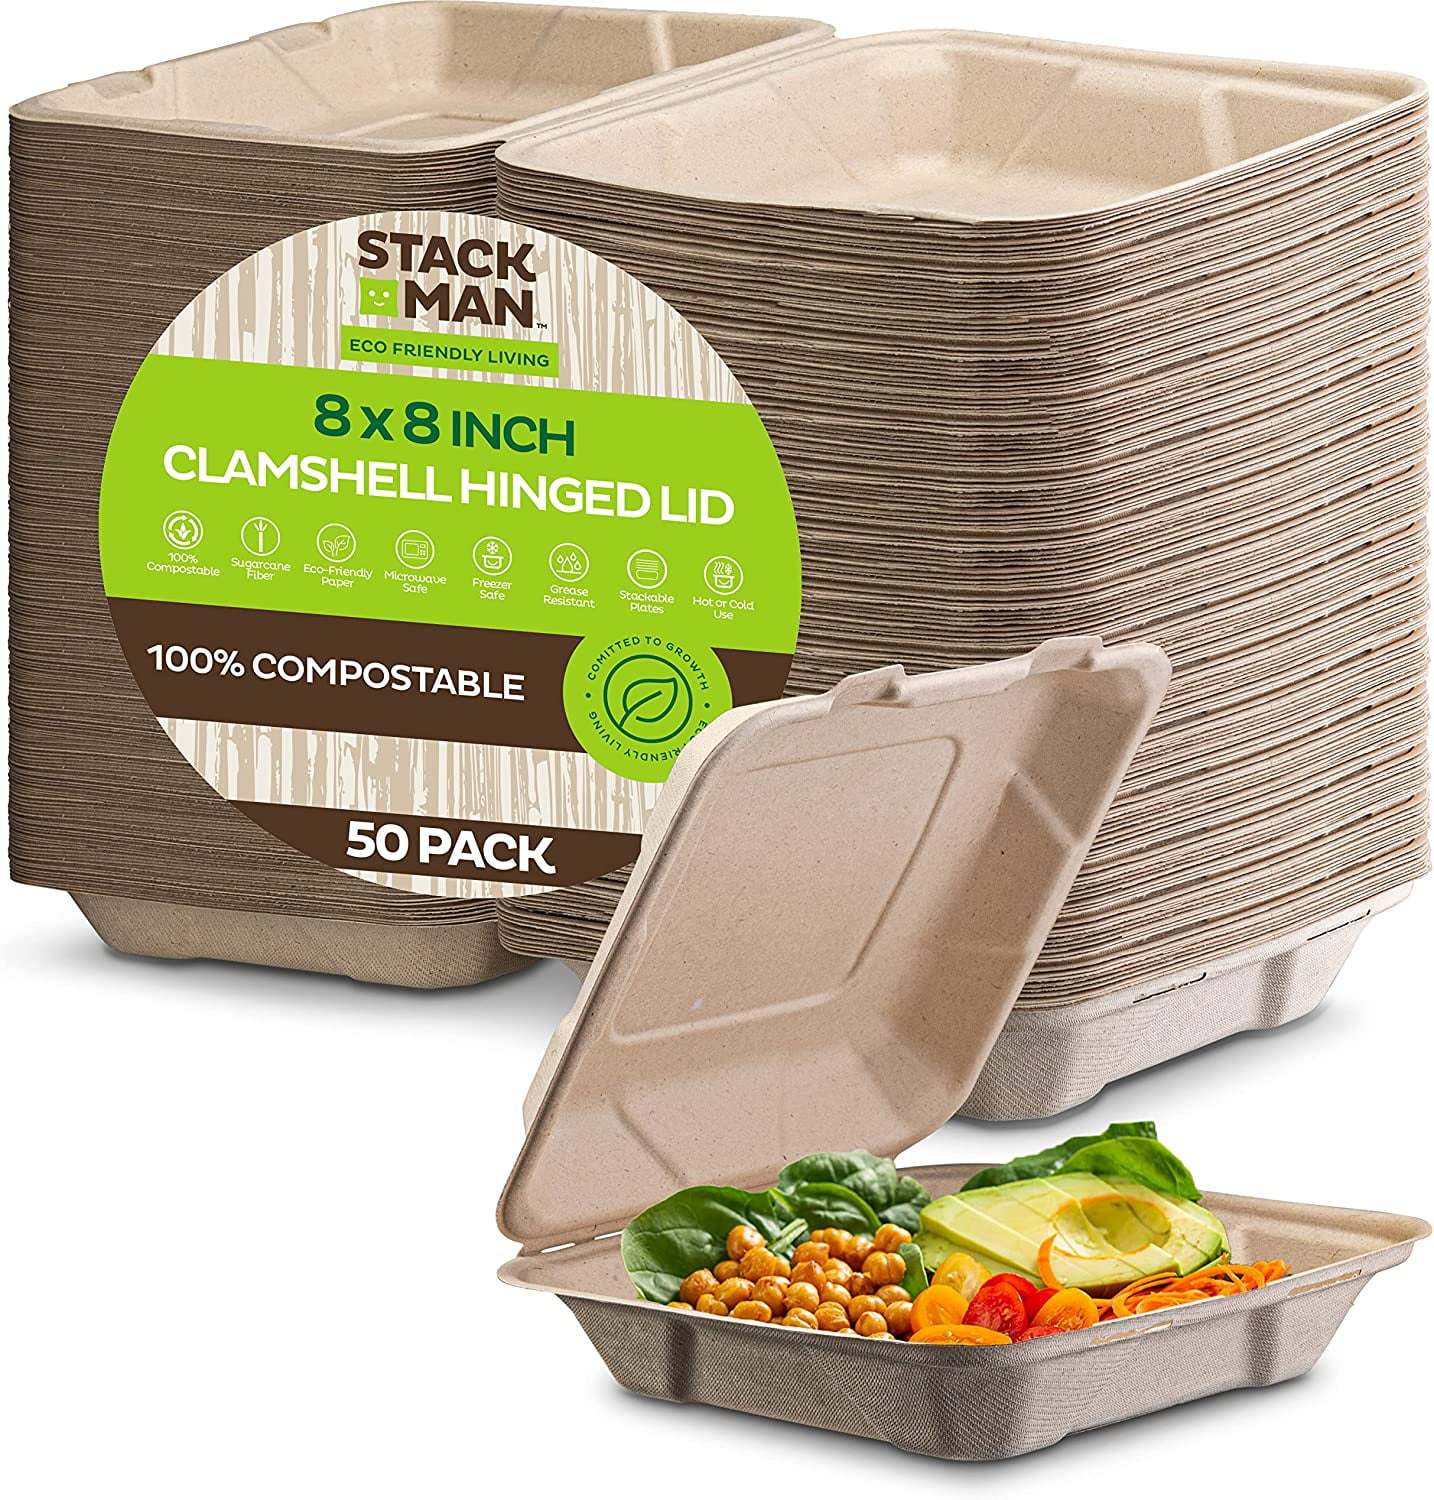 Vallo 100% Compostable Clamshell to Go Boxes for Food 8x8 1-Compartment 50-Pack Disposable Take Out Containers, Made of Biodegradable Sugar Cane, EC